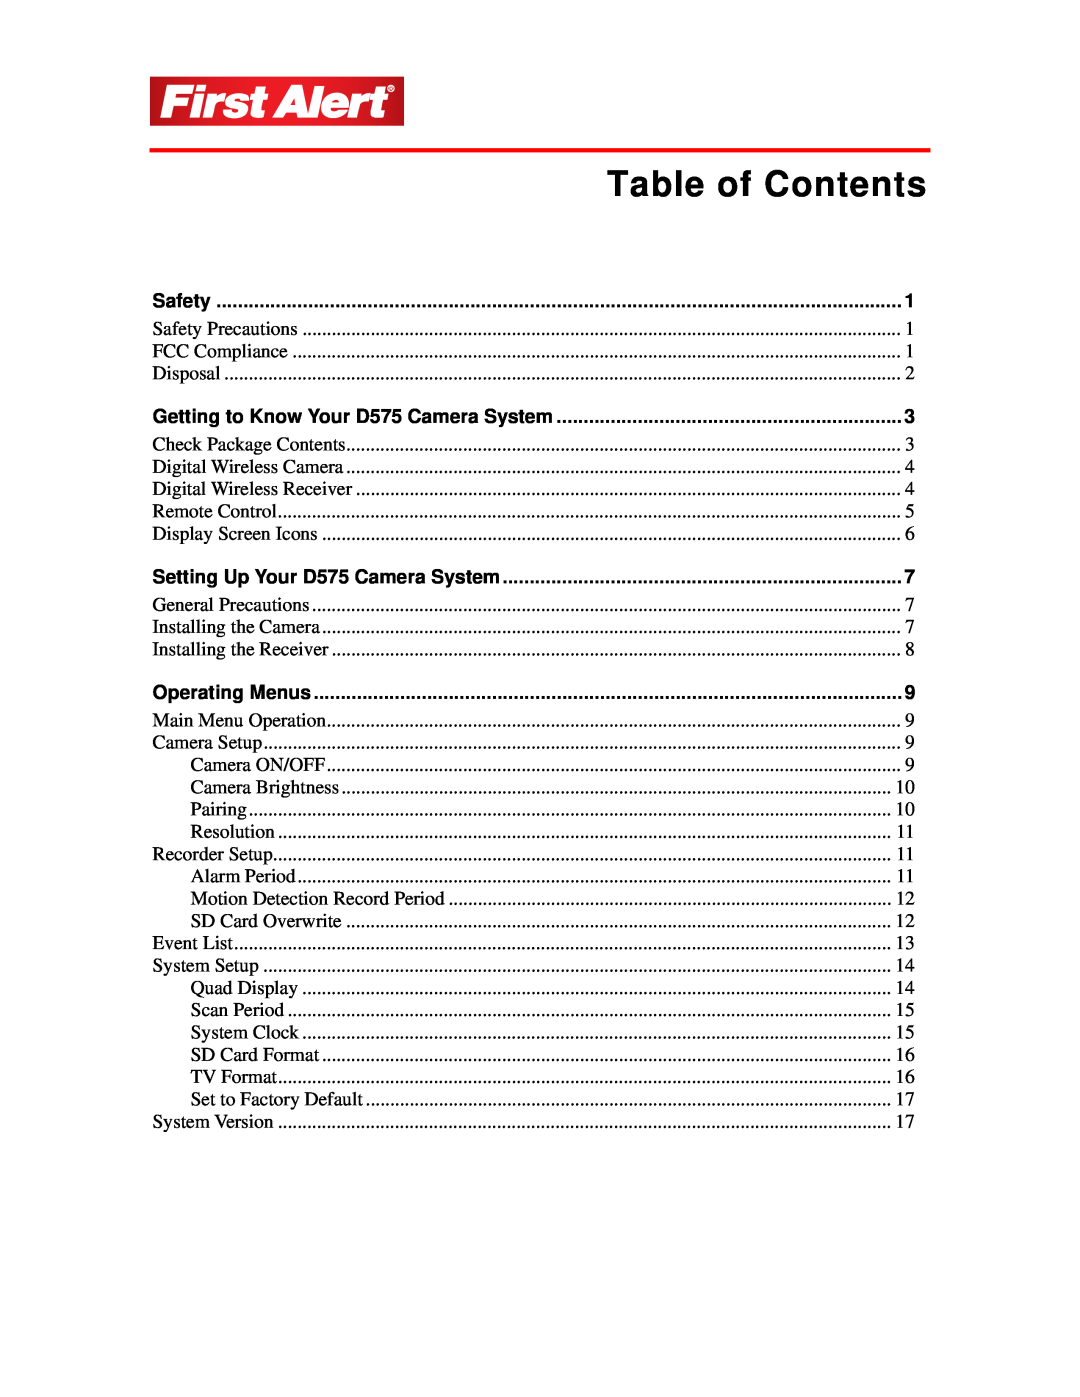 First Alert user manual Table of Contents, Safety, Setting Up Your D575 Camera System 